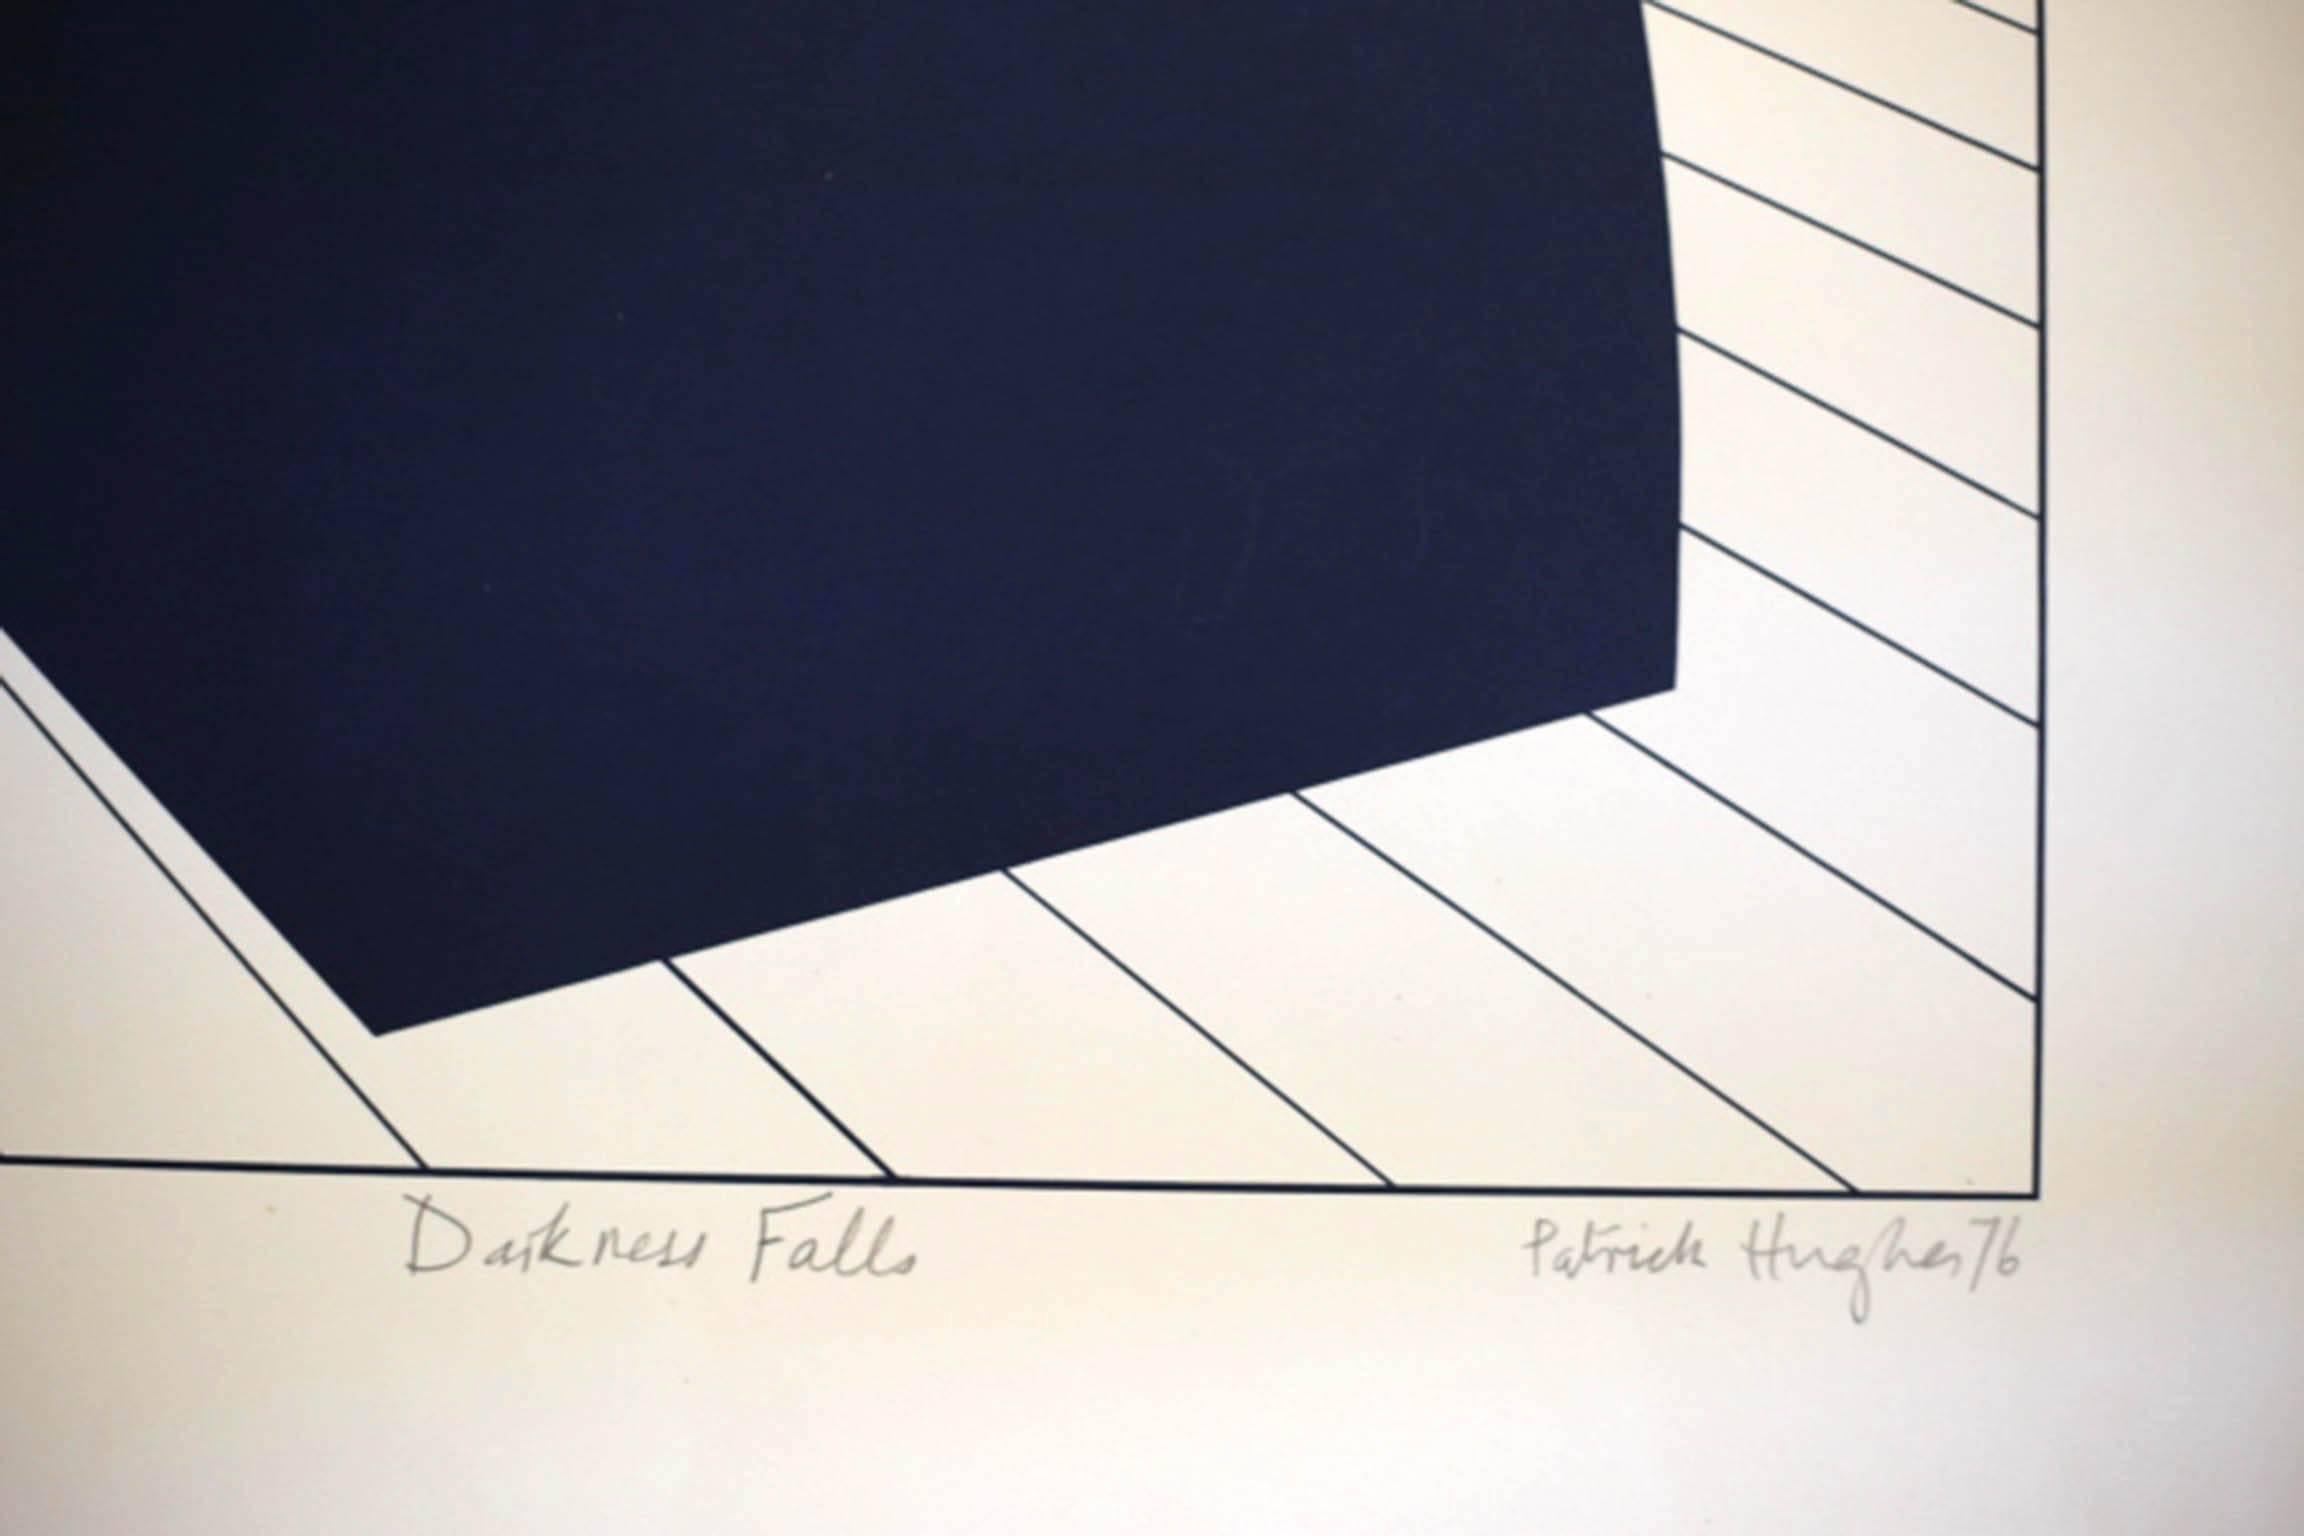 Artist: Patrick Hughes, British (1939)
Title: Darkness Falls
Year: 1976
Medium: Silkscreen, signed and numbered in pencil #33/100
Unframed.